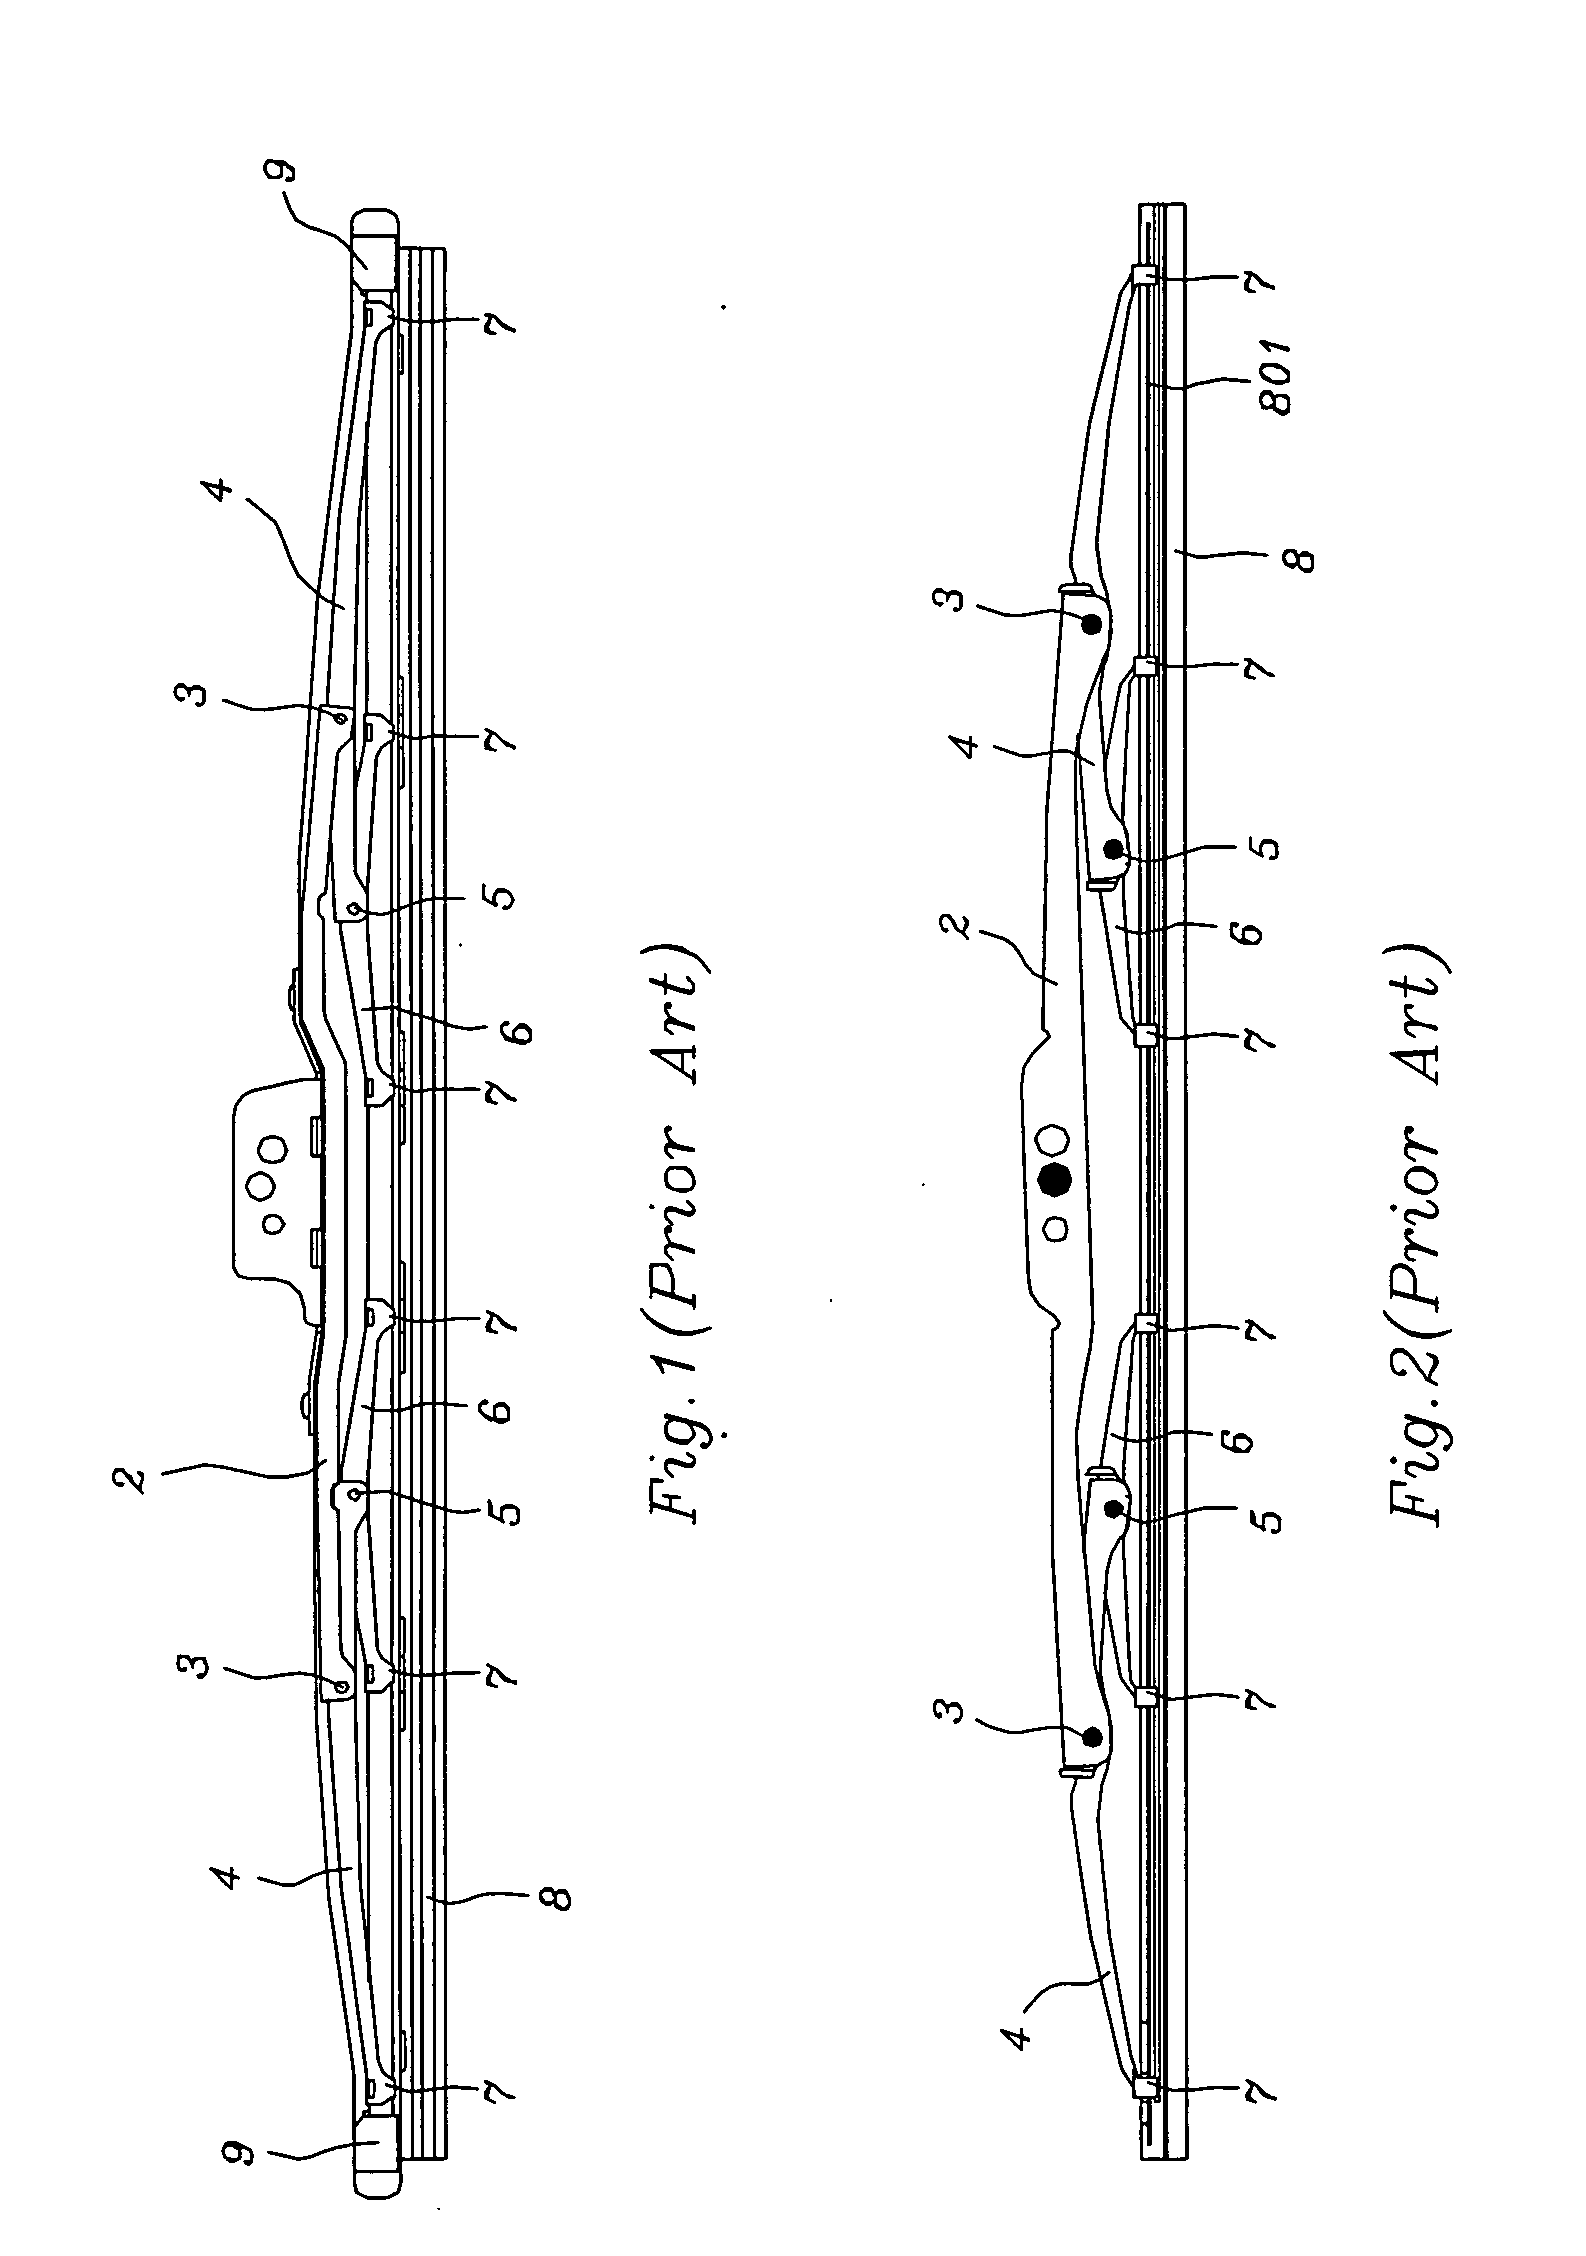 Windshield wiper structure for vehicles